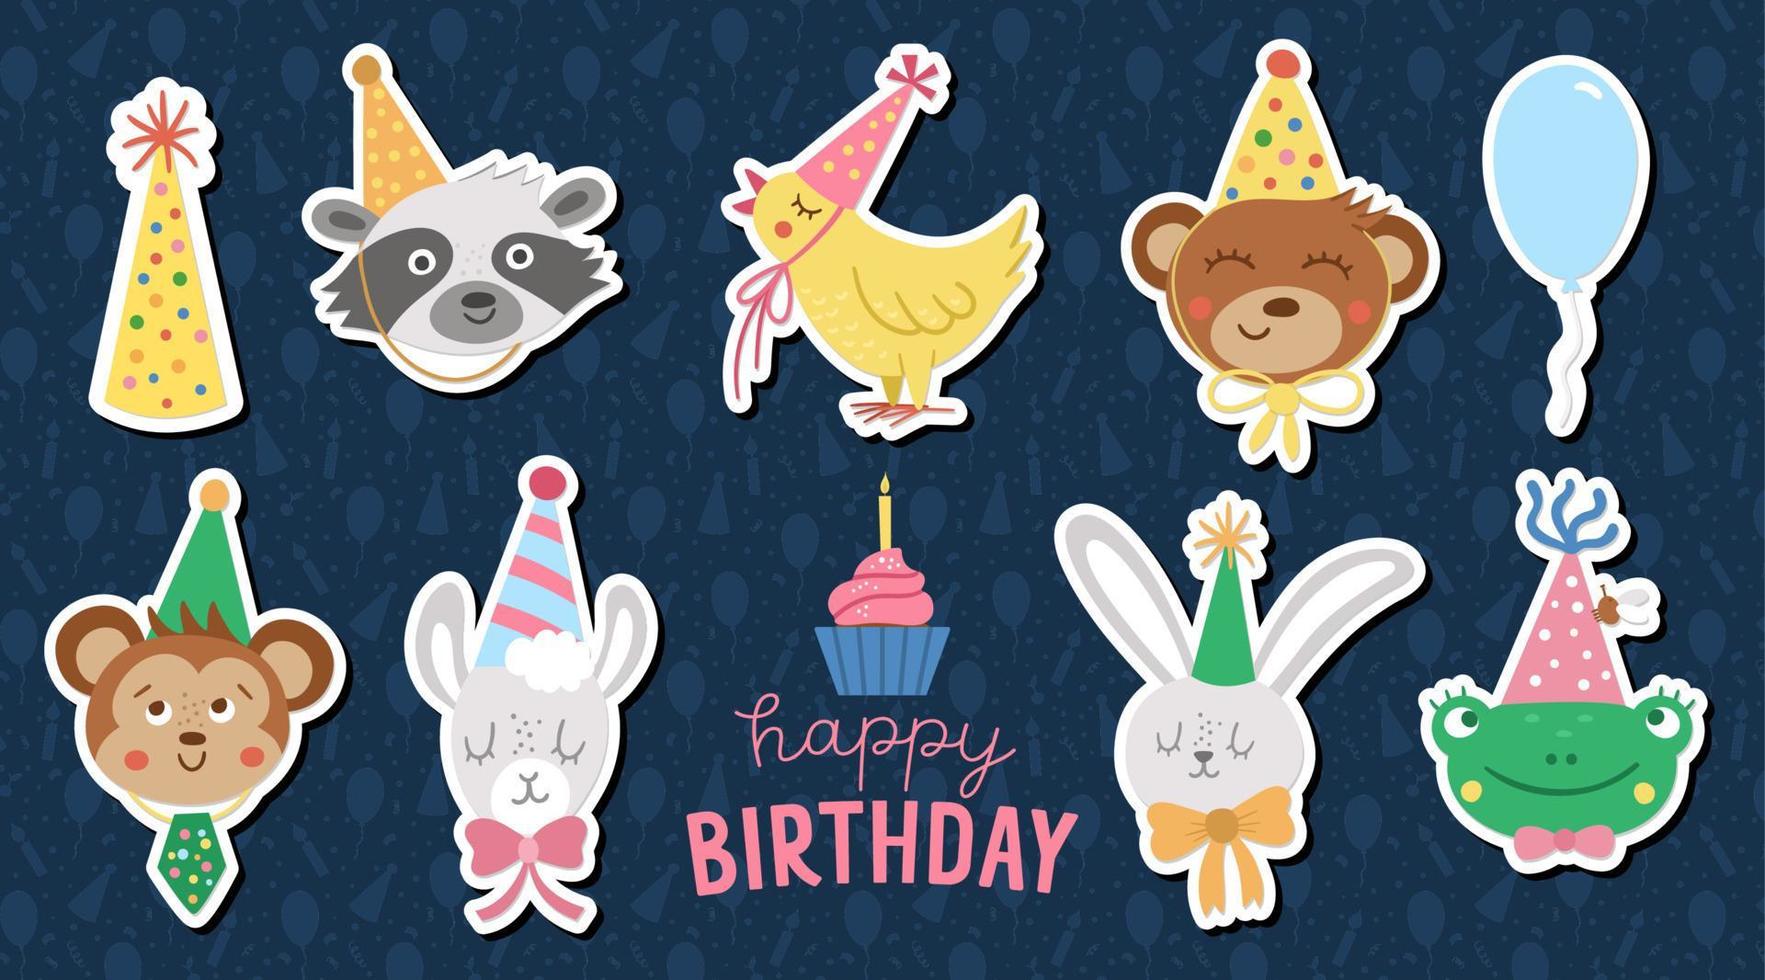 Set of vector stickers with cute animal faces in party hats. Happy birthday avatars collection. Funny holiday illustration of bear, frog, llama, raccoon, hare, monkey for kids. Celebration icons pack